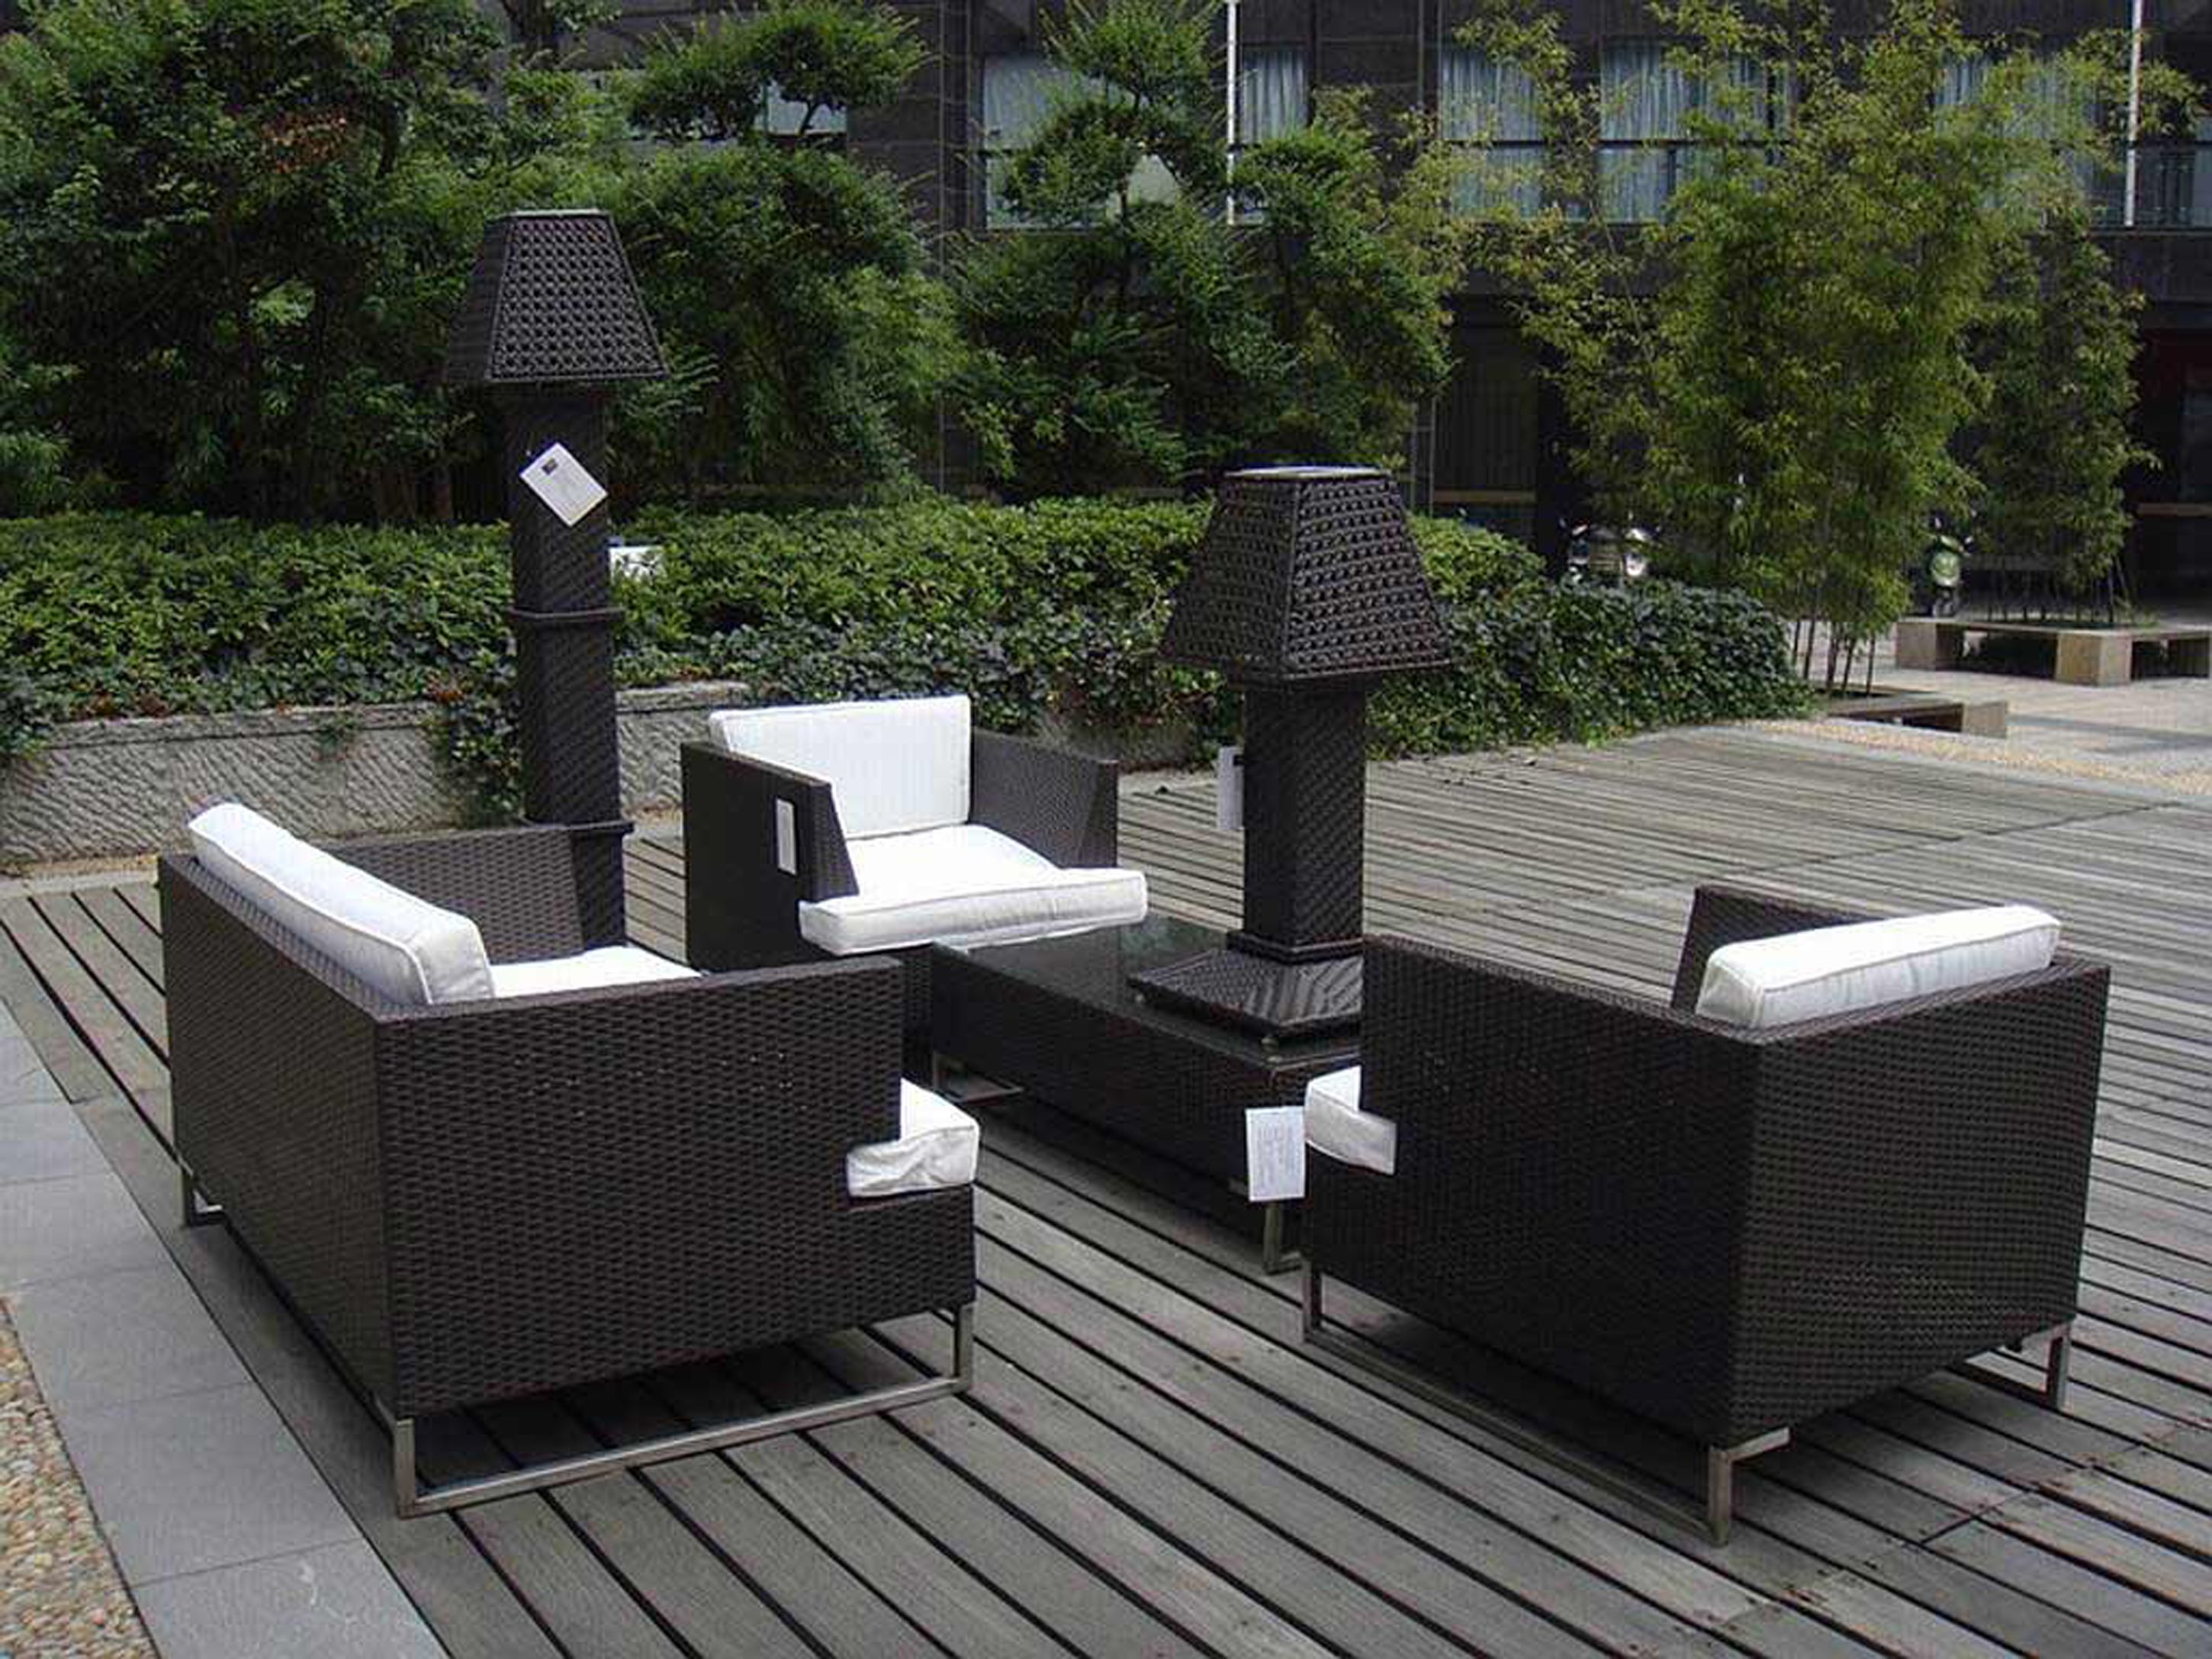 Luxury Modern Outdoor Design Idea With Black Wicker Sofas With White Seat Cushions And Black Coffee Table With Black Desk Lamp Affordable Modern Outdoor Design Ideas (Photo 114 of 123)